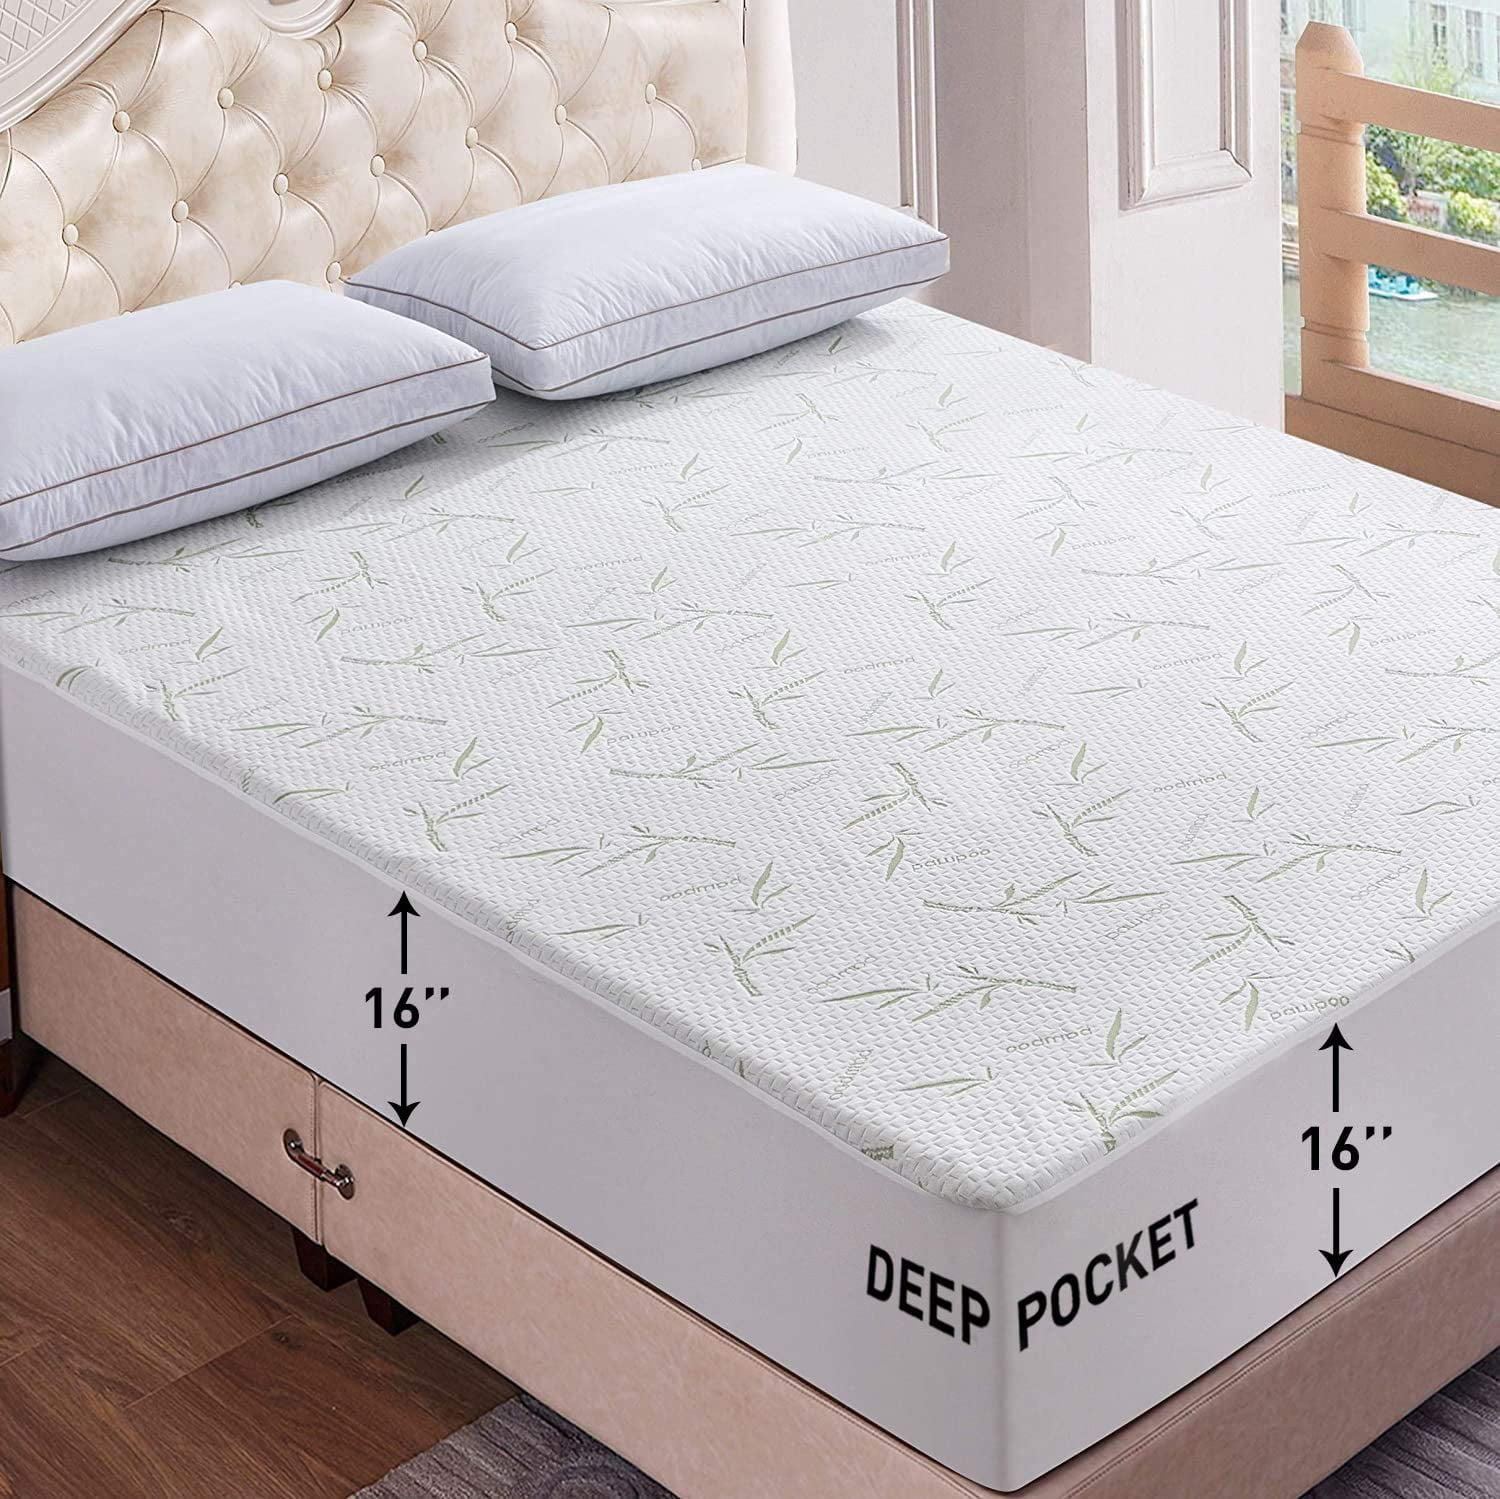 Details about   Bamboo Waterproof Mattress Protector Breathable Fitted Cover 38cm/16" Extra Deep 